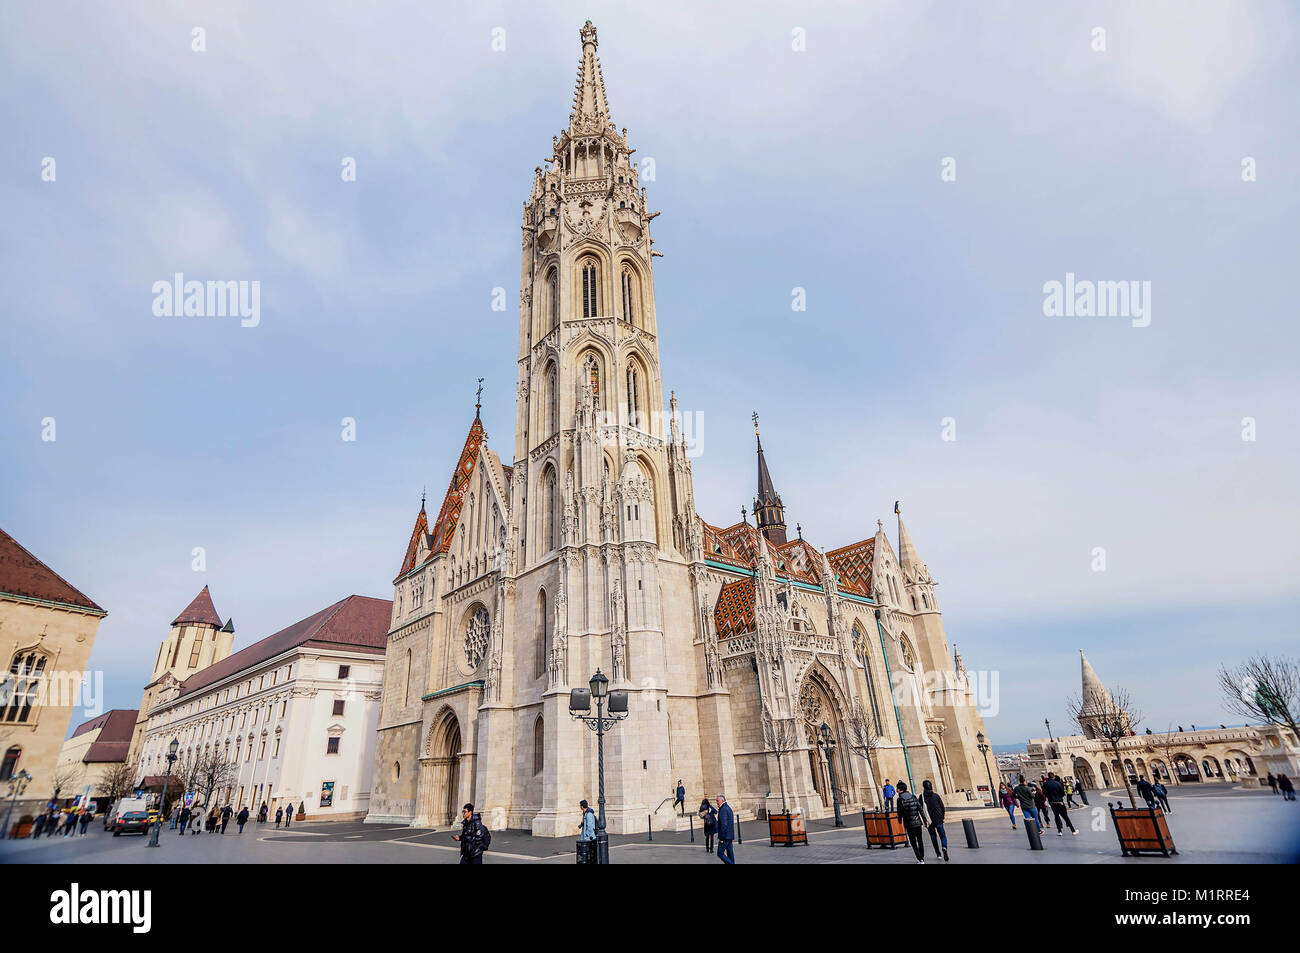 Matthias Church located in front of the Fisherman's Bastion in Budapest, Hungary Stock Photo